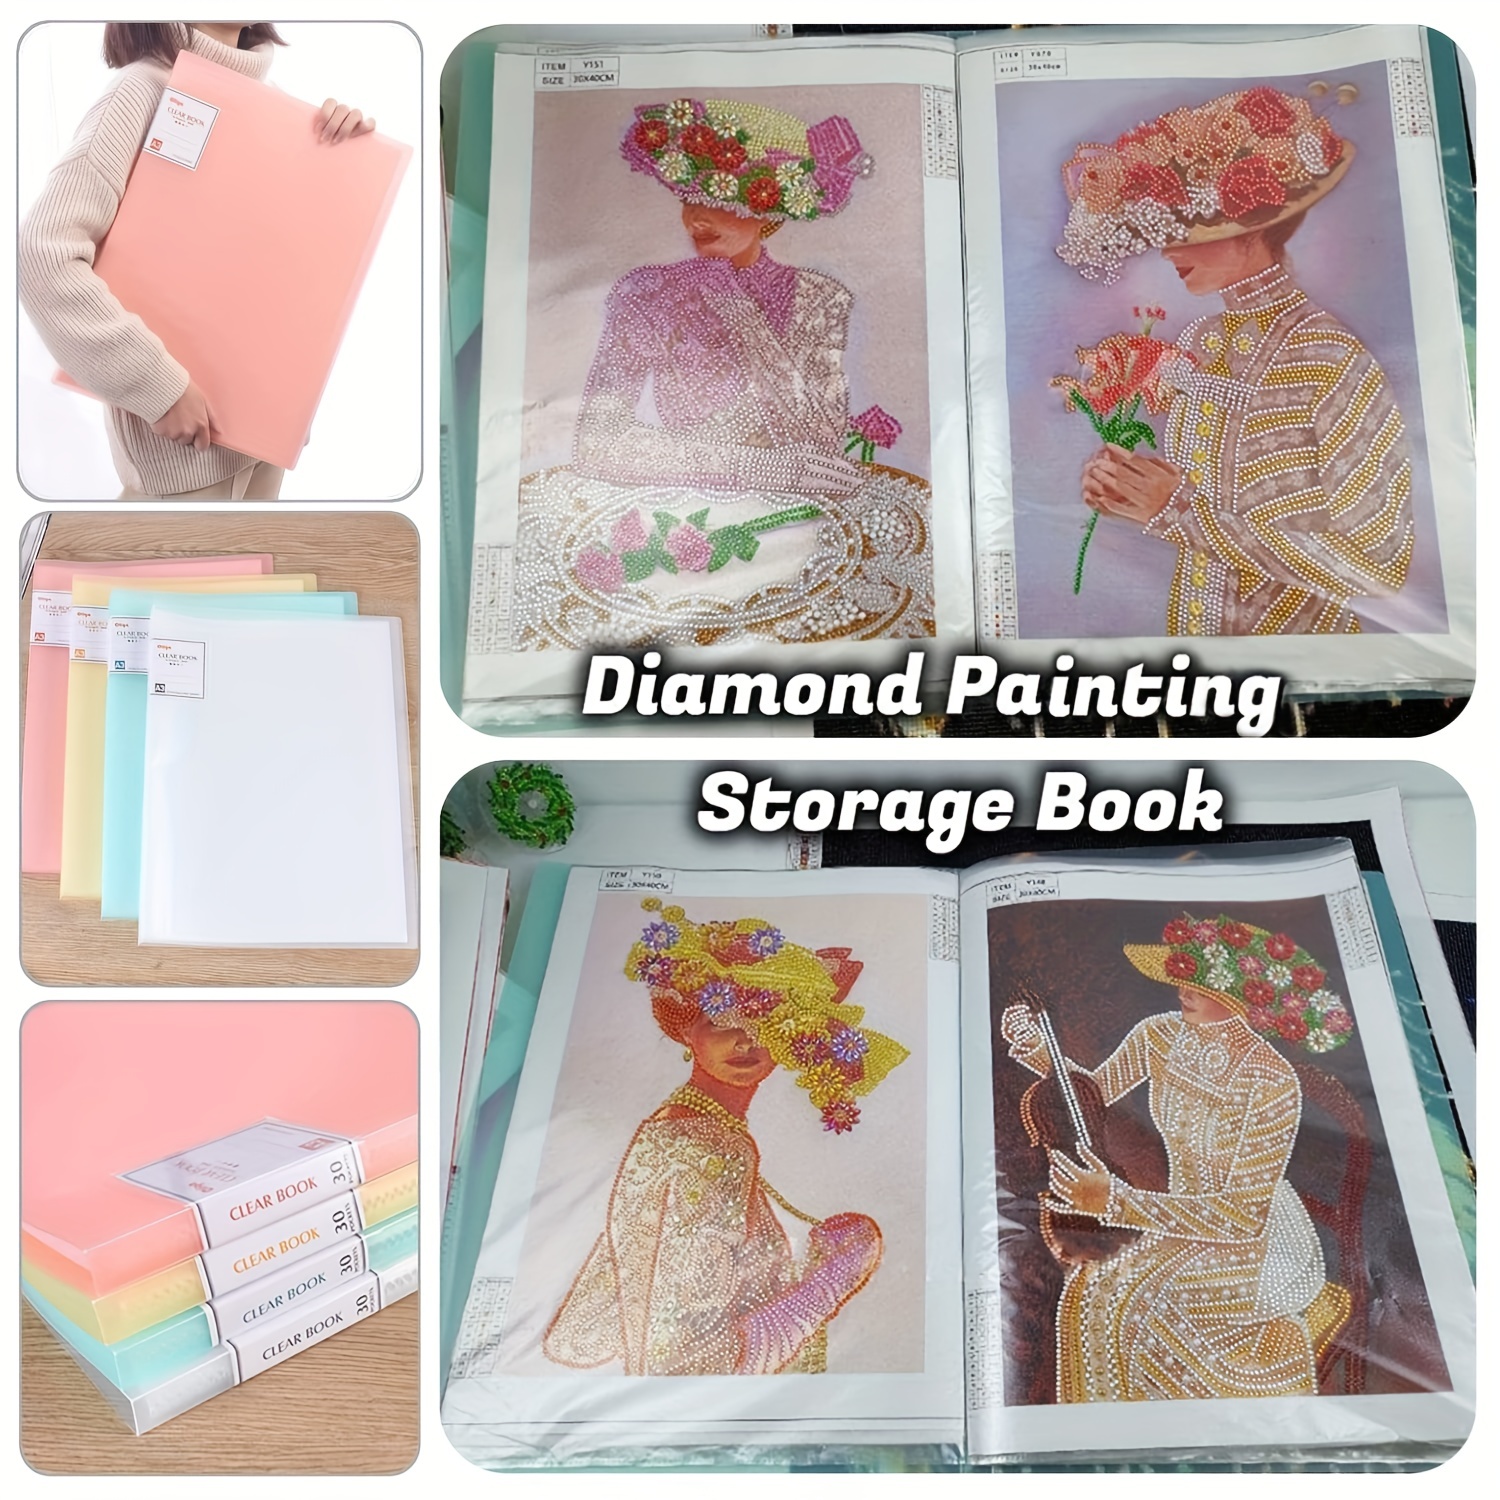 A3/a4 Artificial Diamond Painting Accessories Storage Book, Large